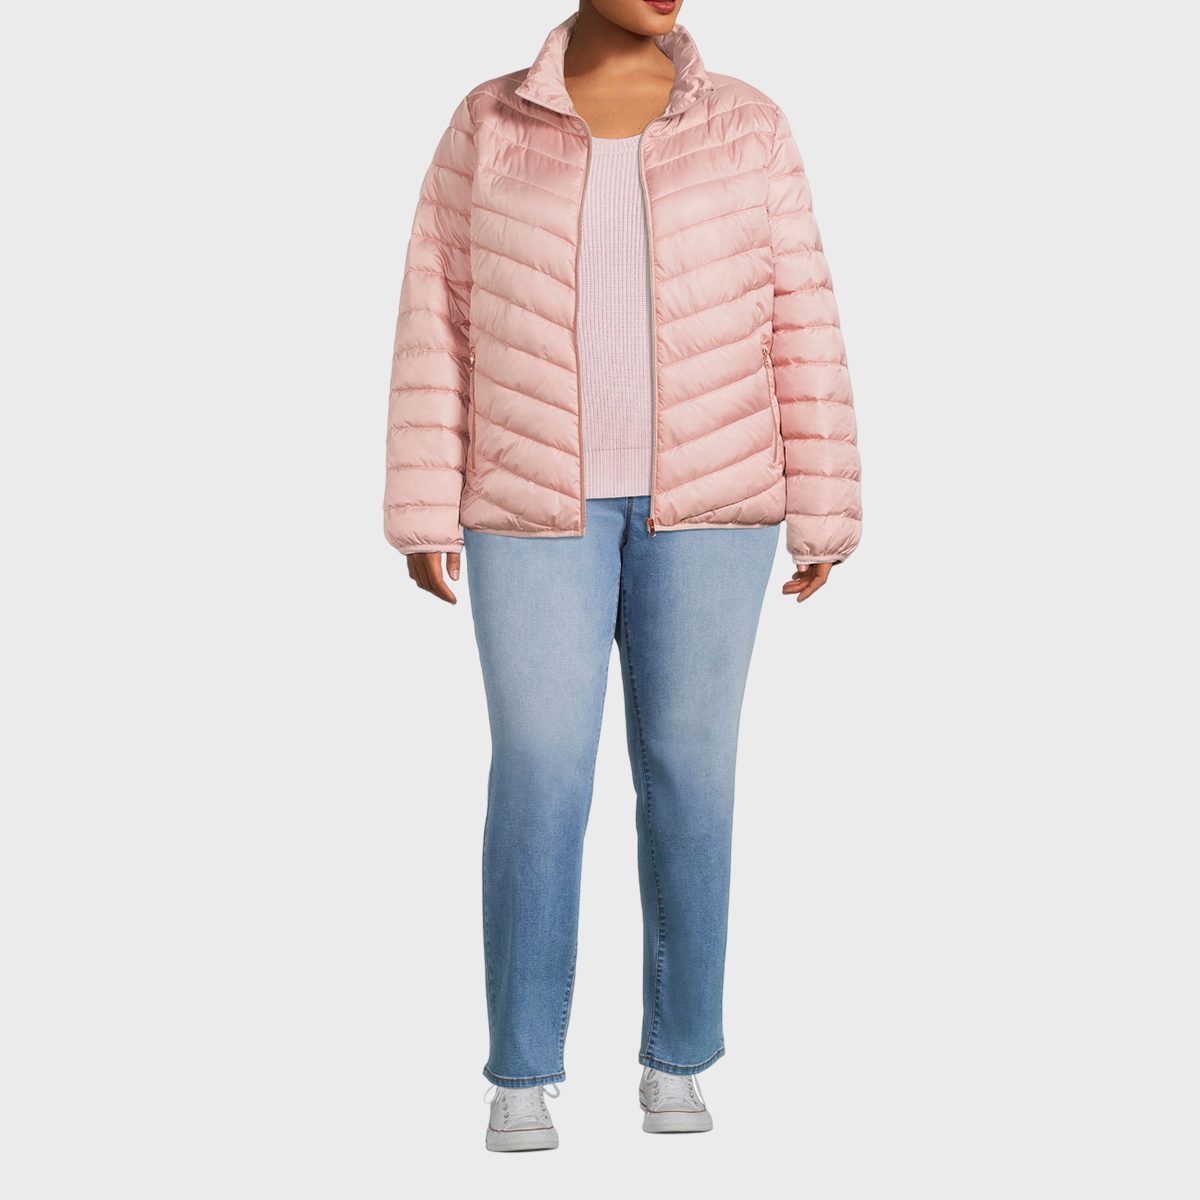 Plus Size Winter Jackets – The Pink Moon